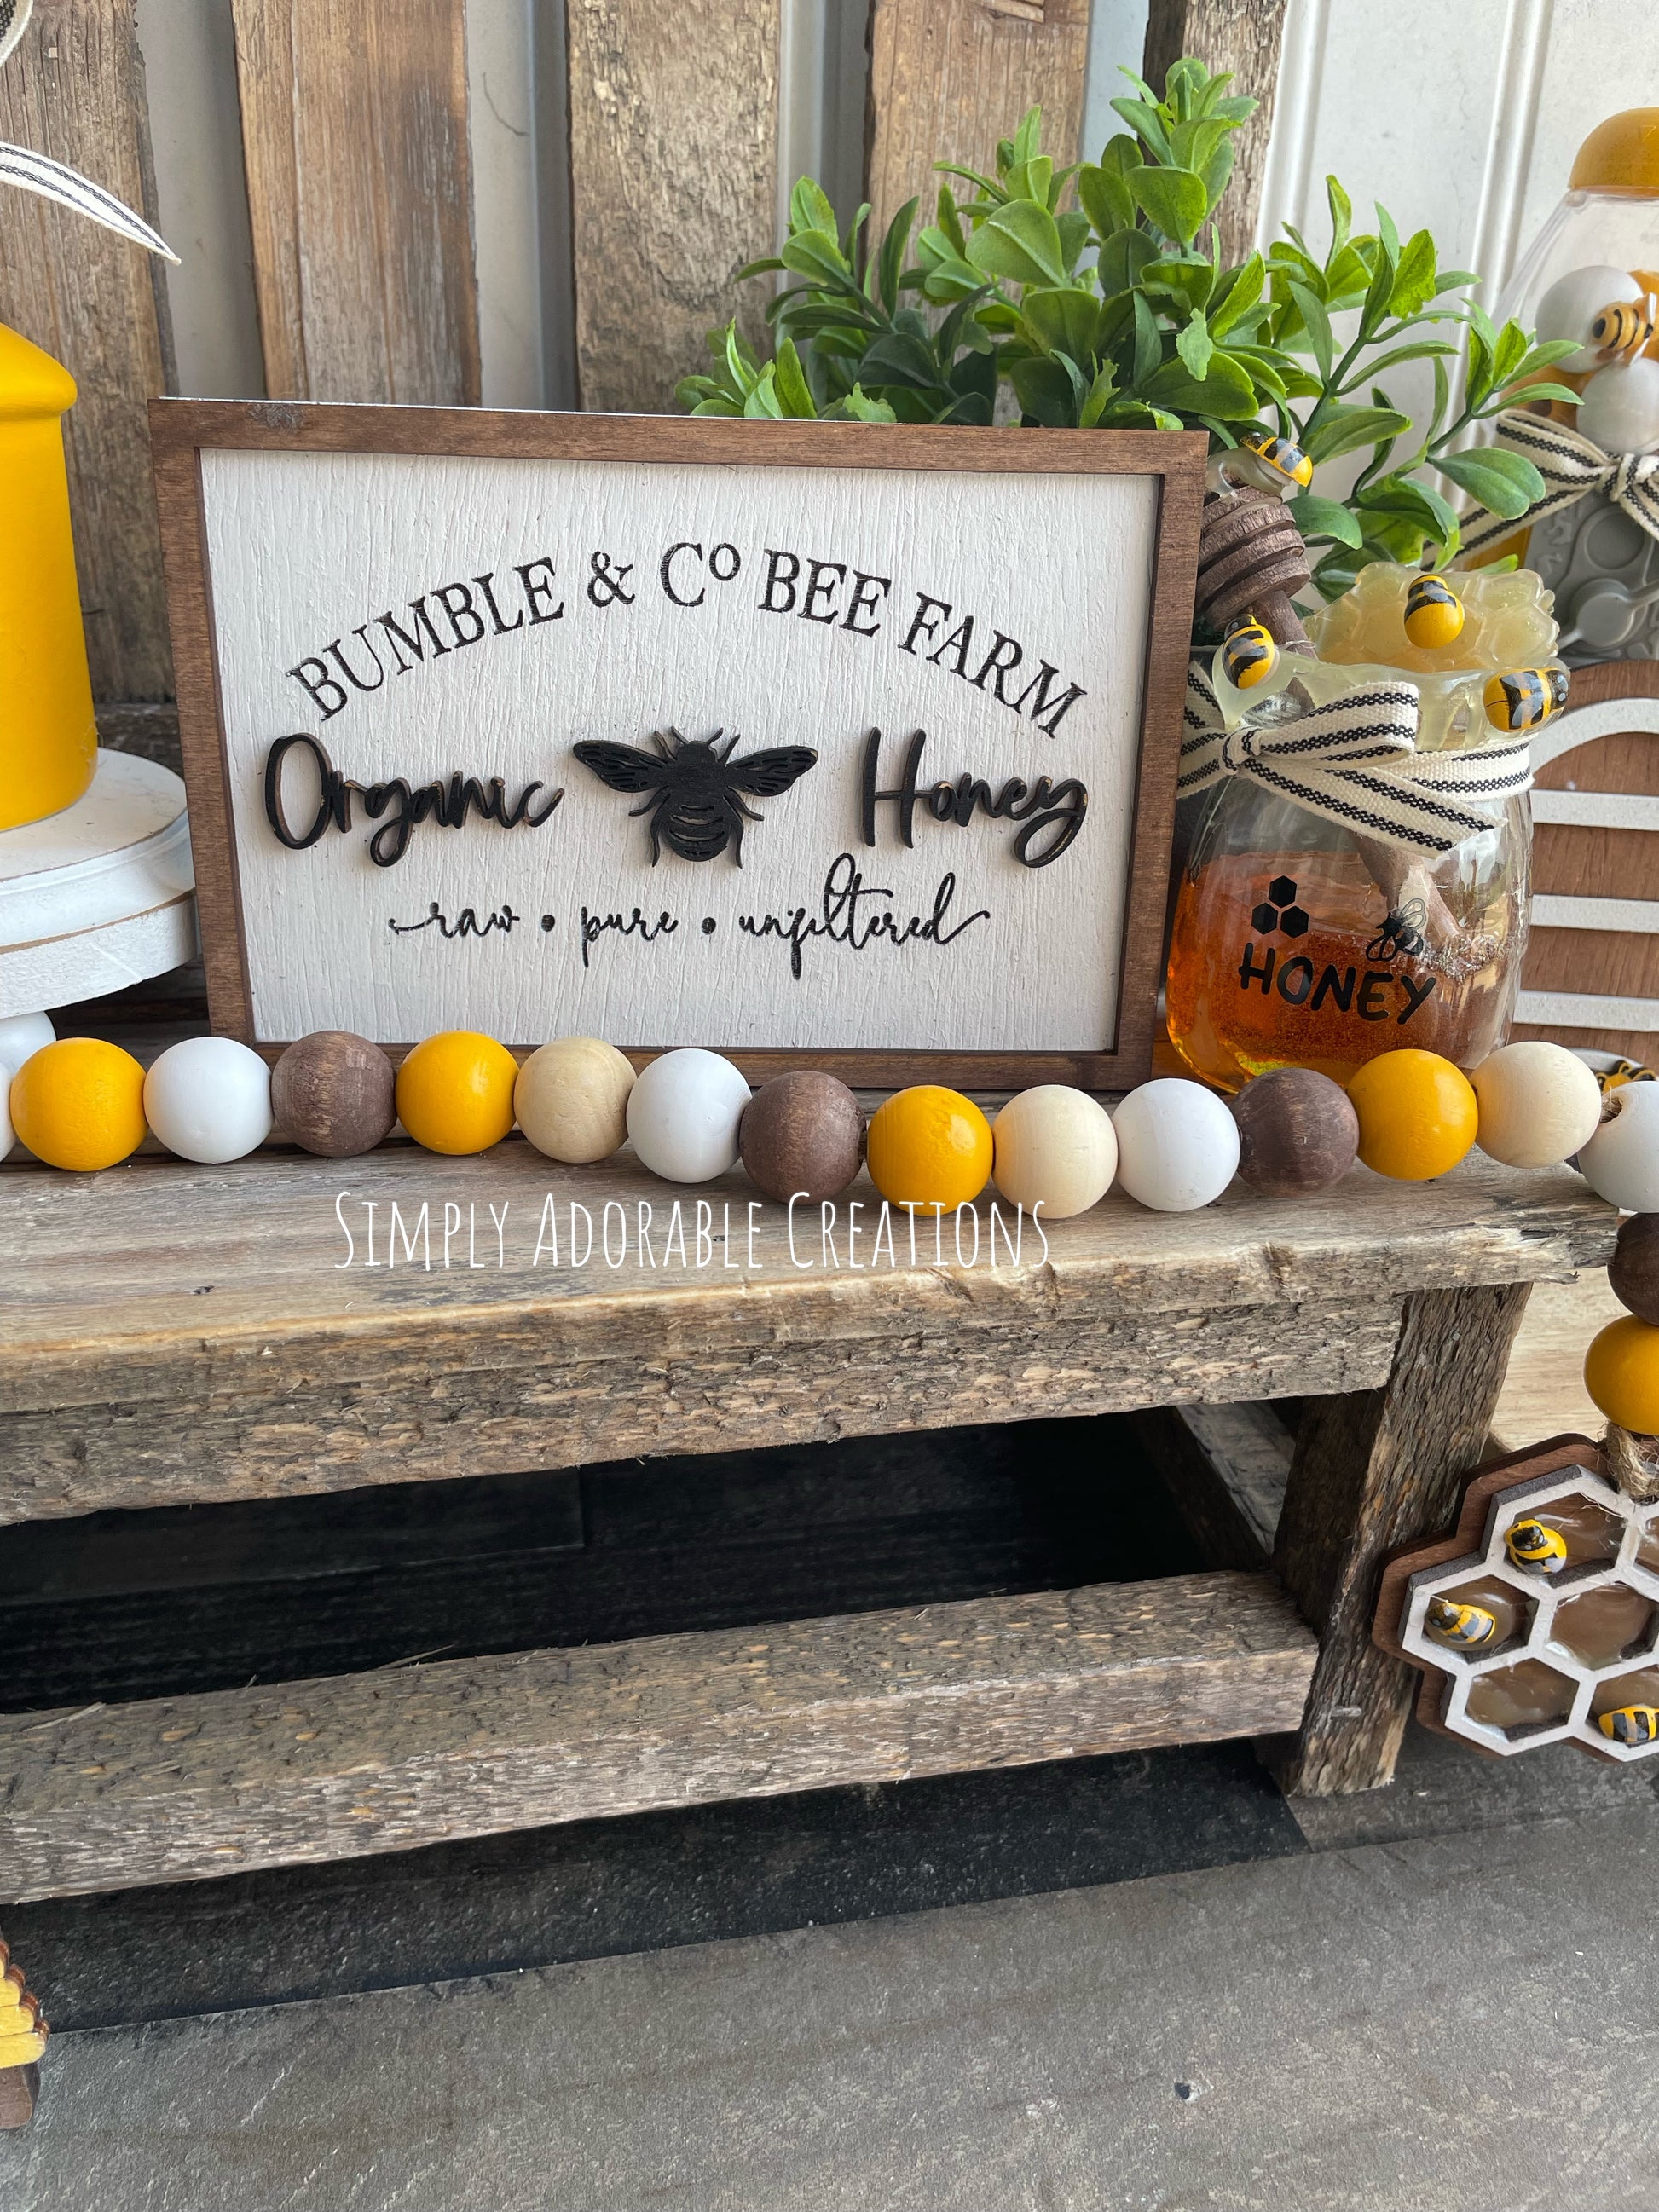 Bee Tiered Tray Decor with Wooden Fake Honey Hive Dippers Bumble Bee Gifts  fo